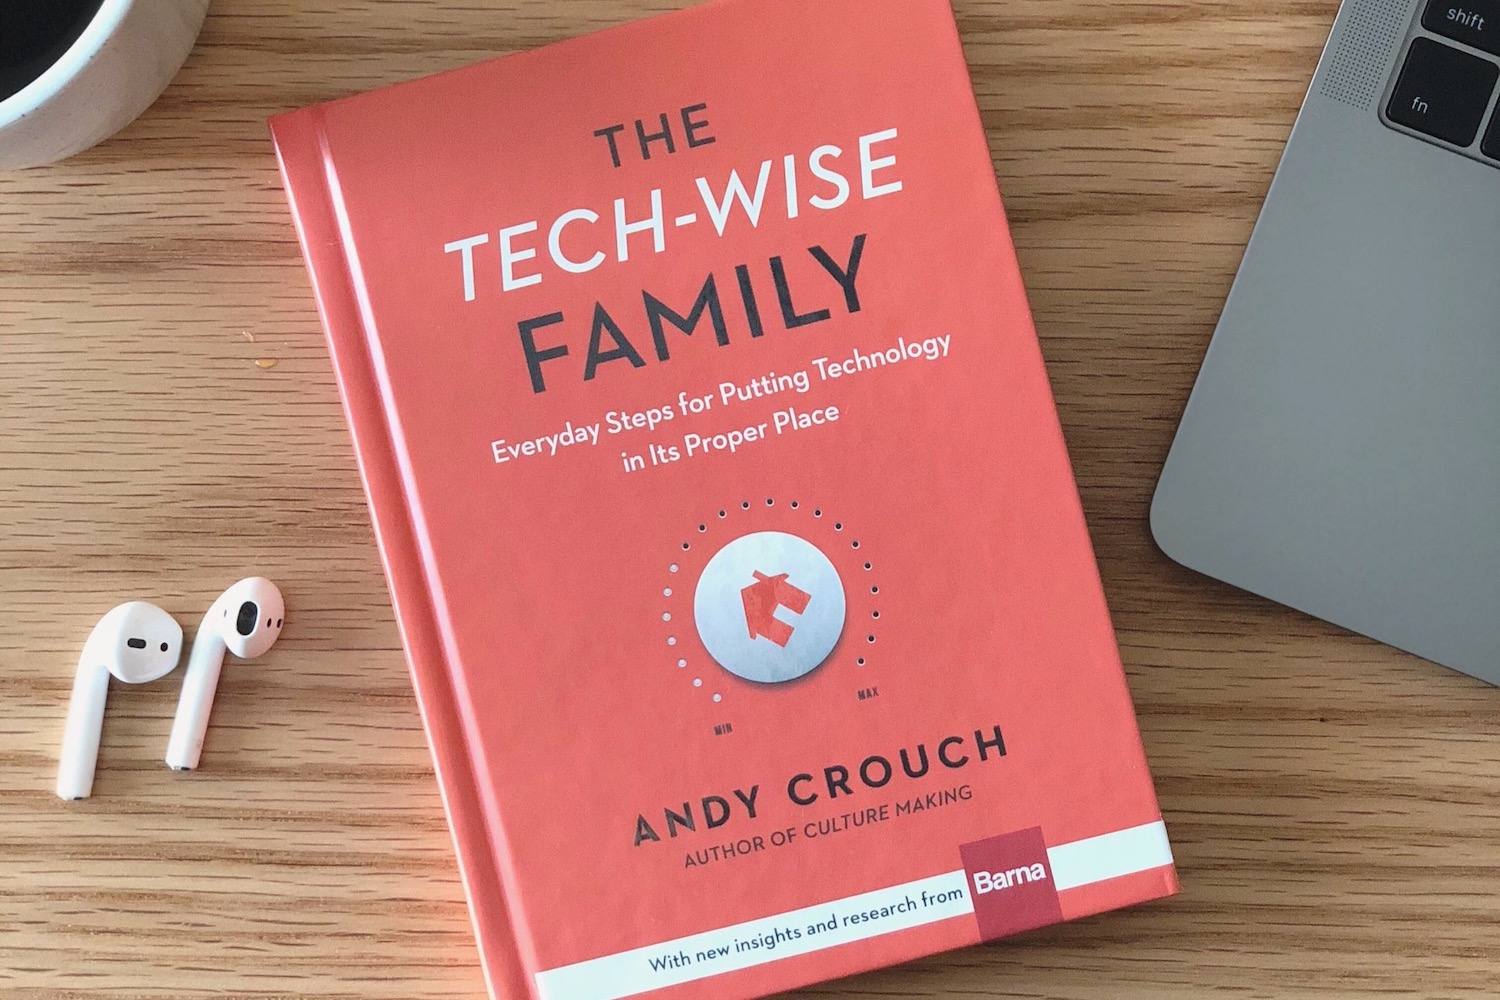 The Tech-wise Family